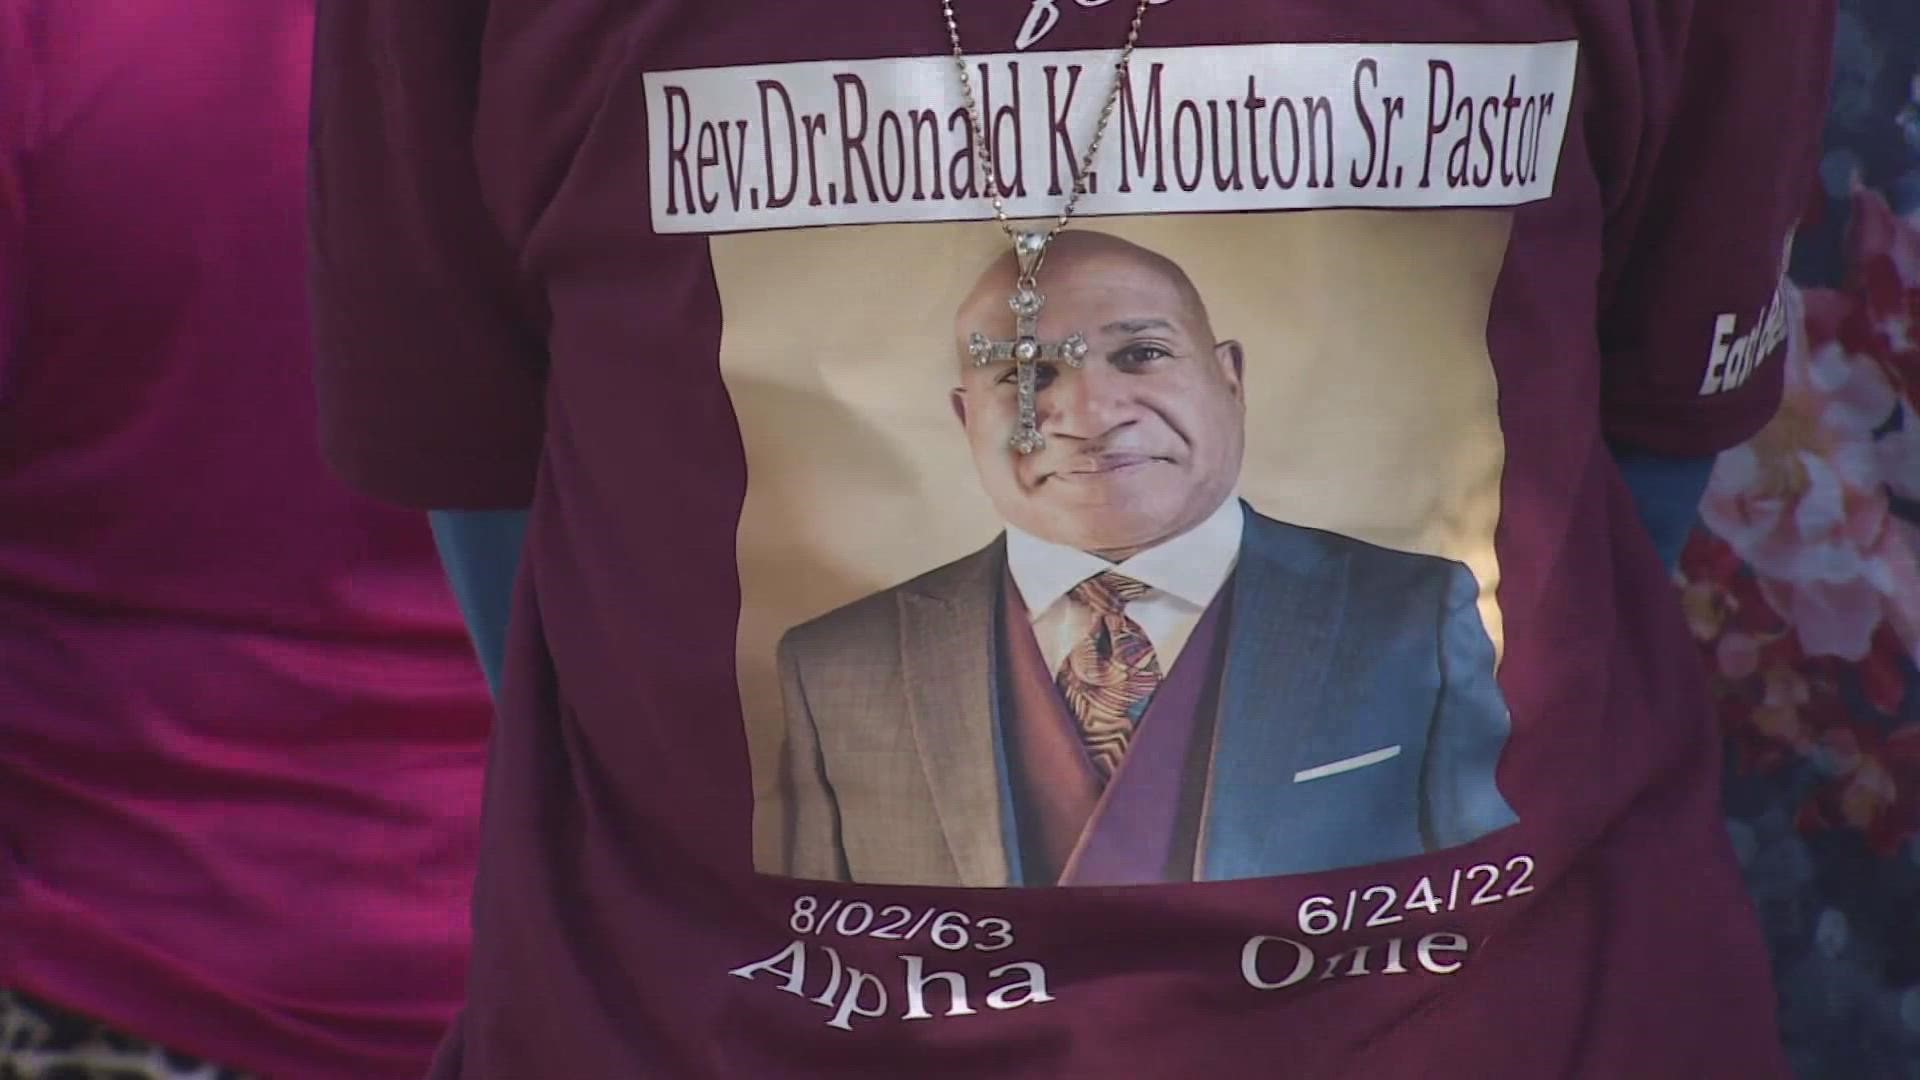 Police said a driver who has yet to be arrested shot and killed Rev. Ronald Mouton along the Gulf Freeway feeder road.